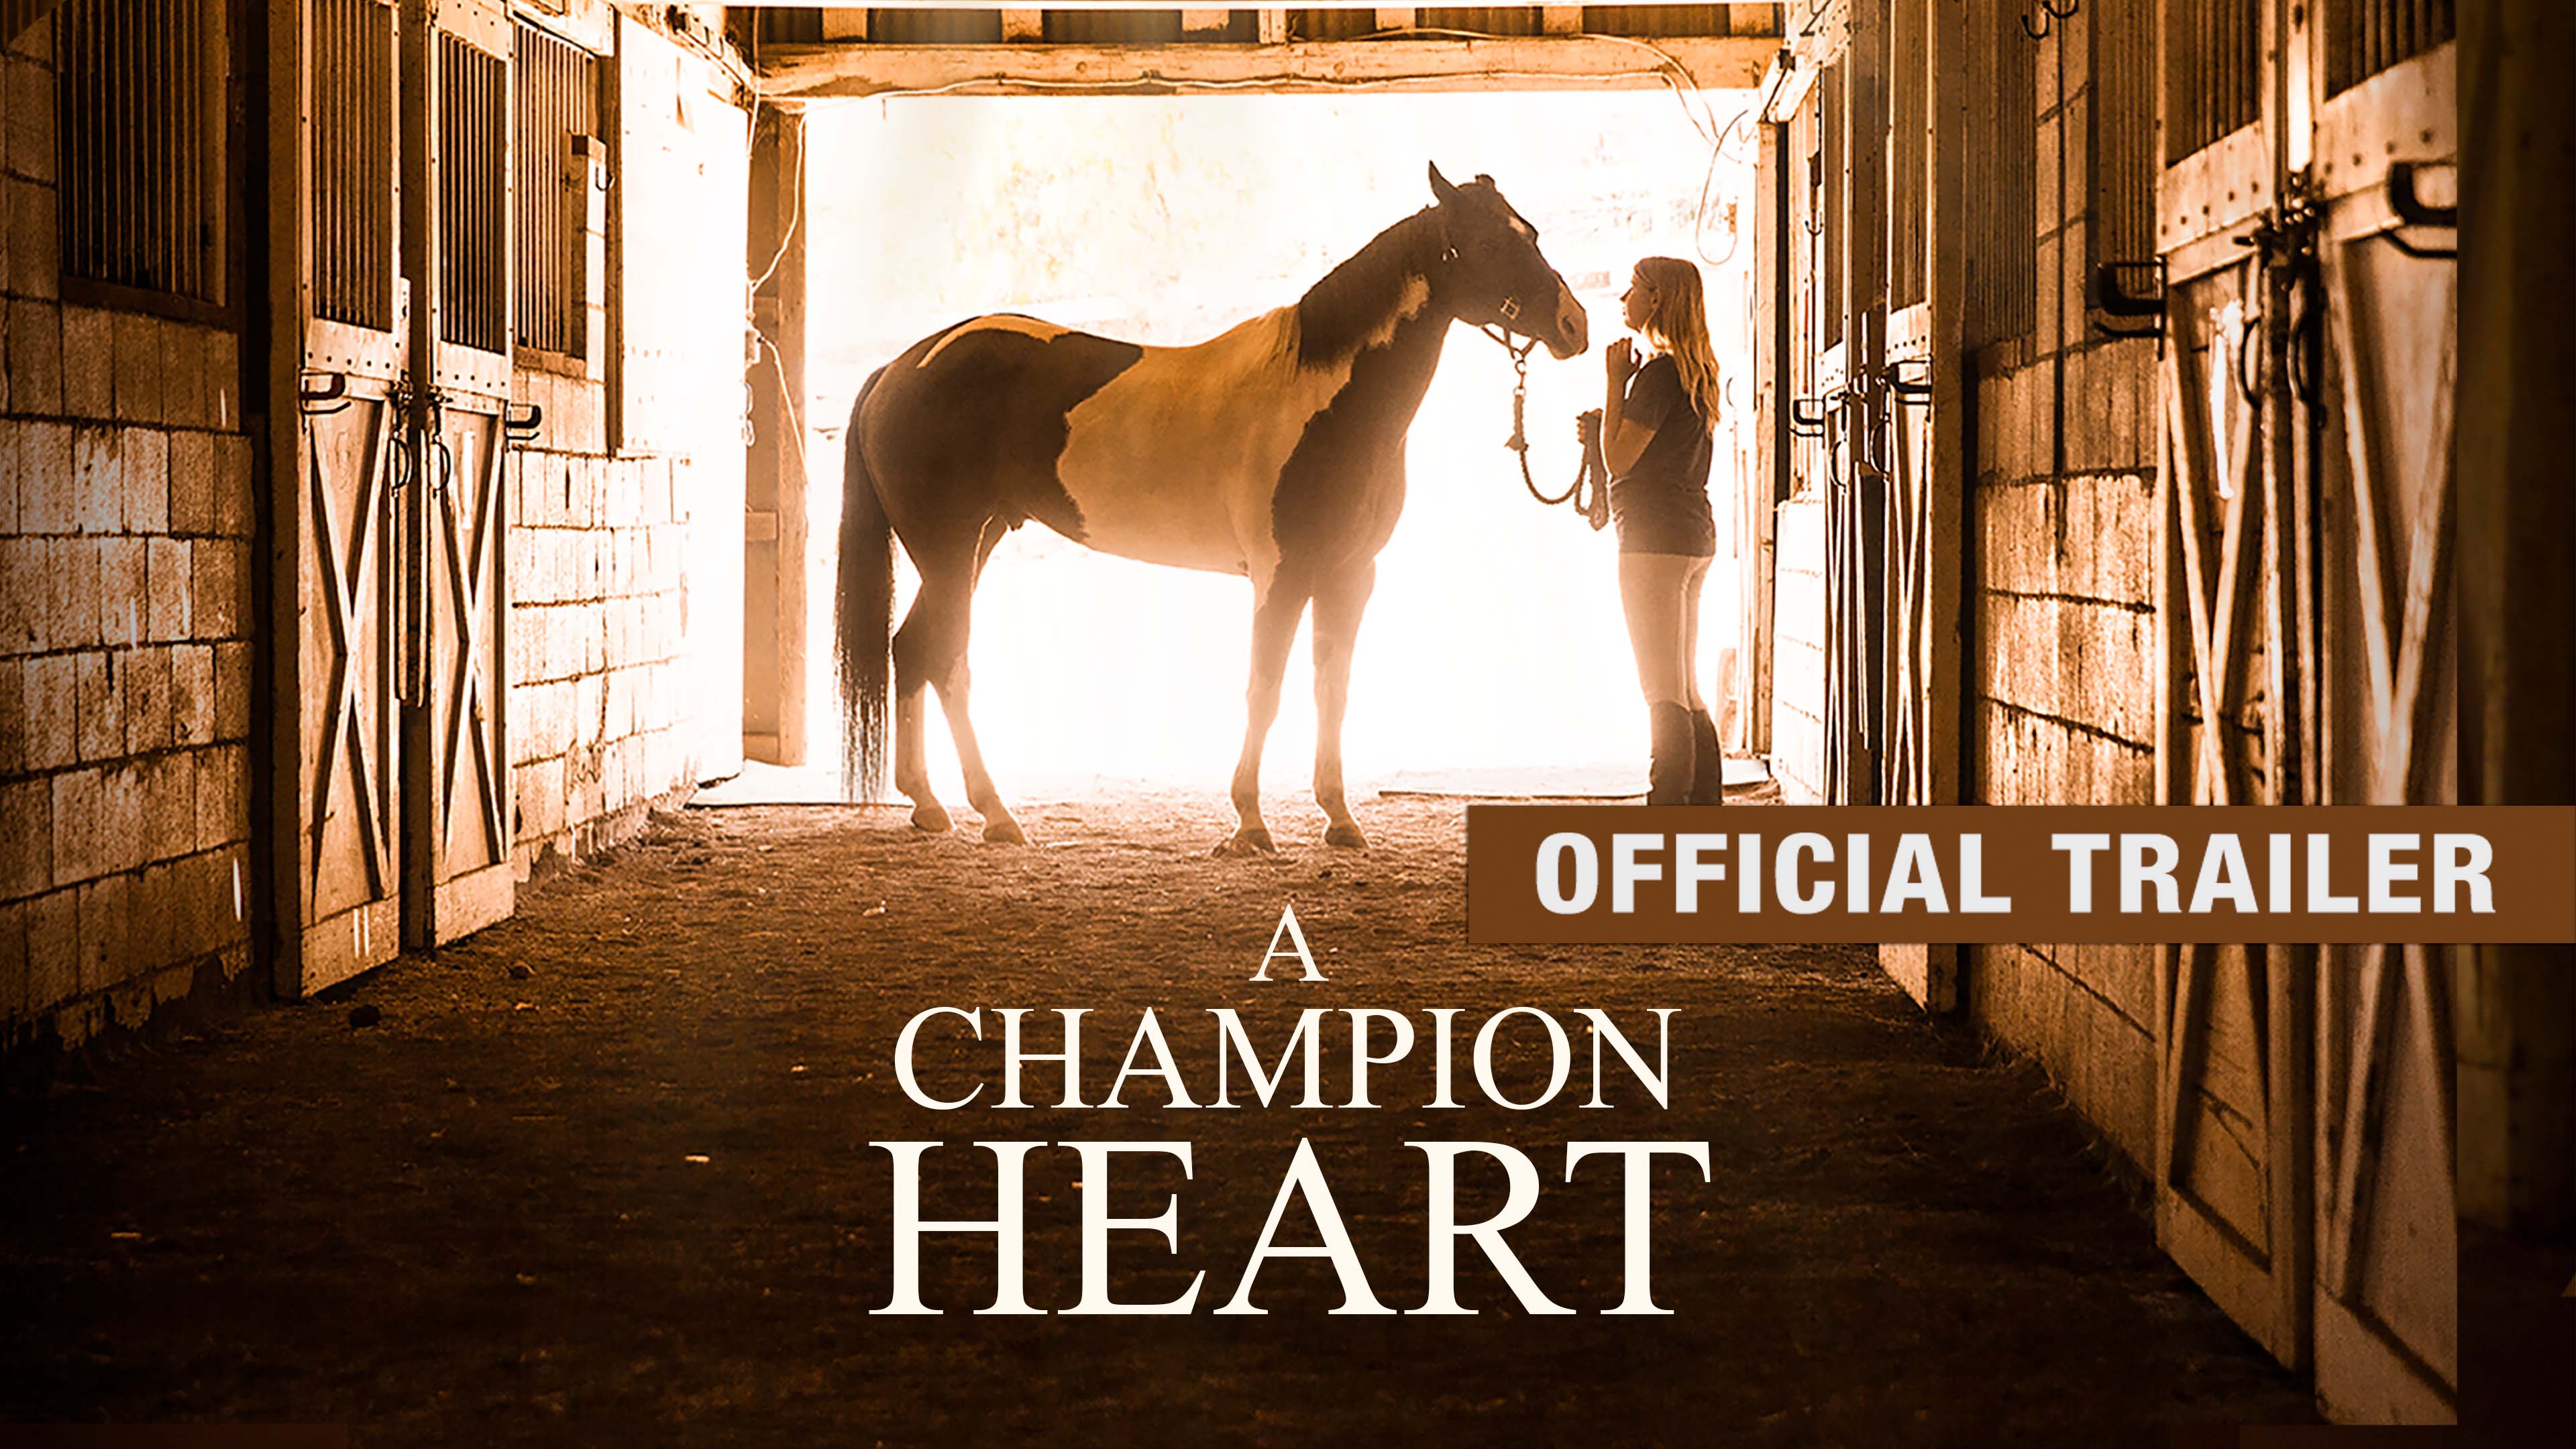 Teaser trailer and poster for movie “Champion”